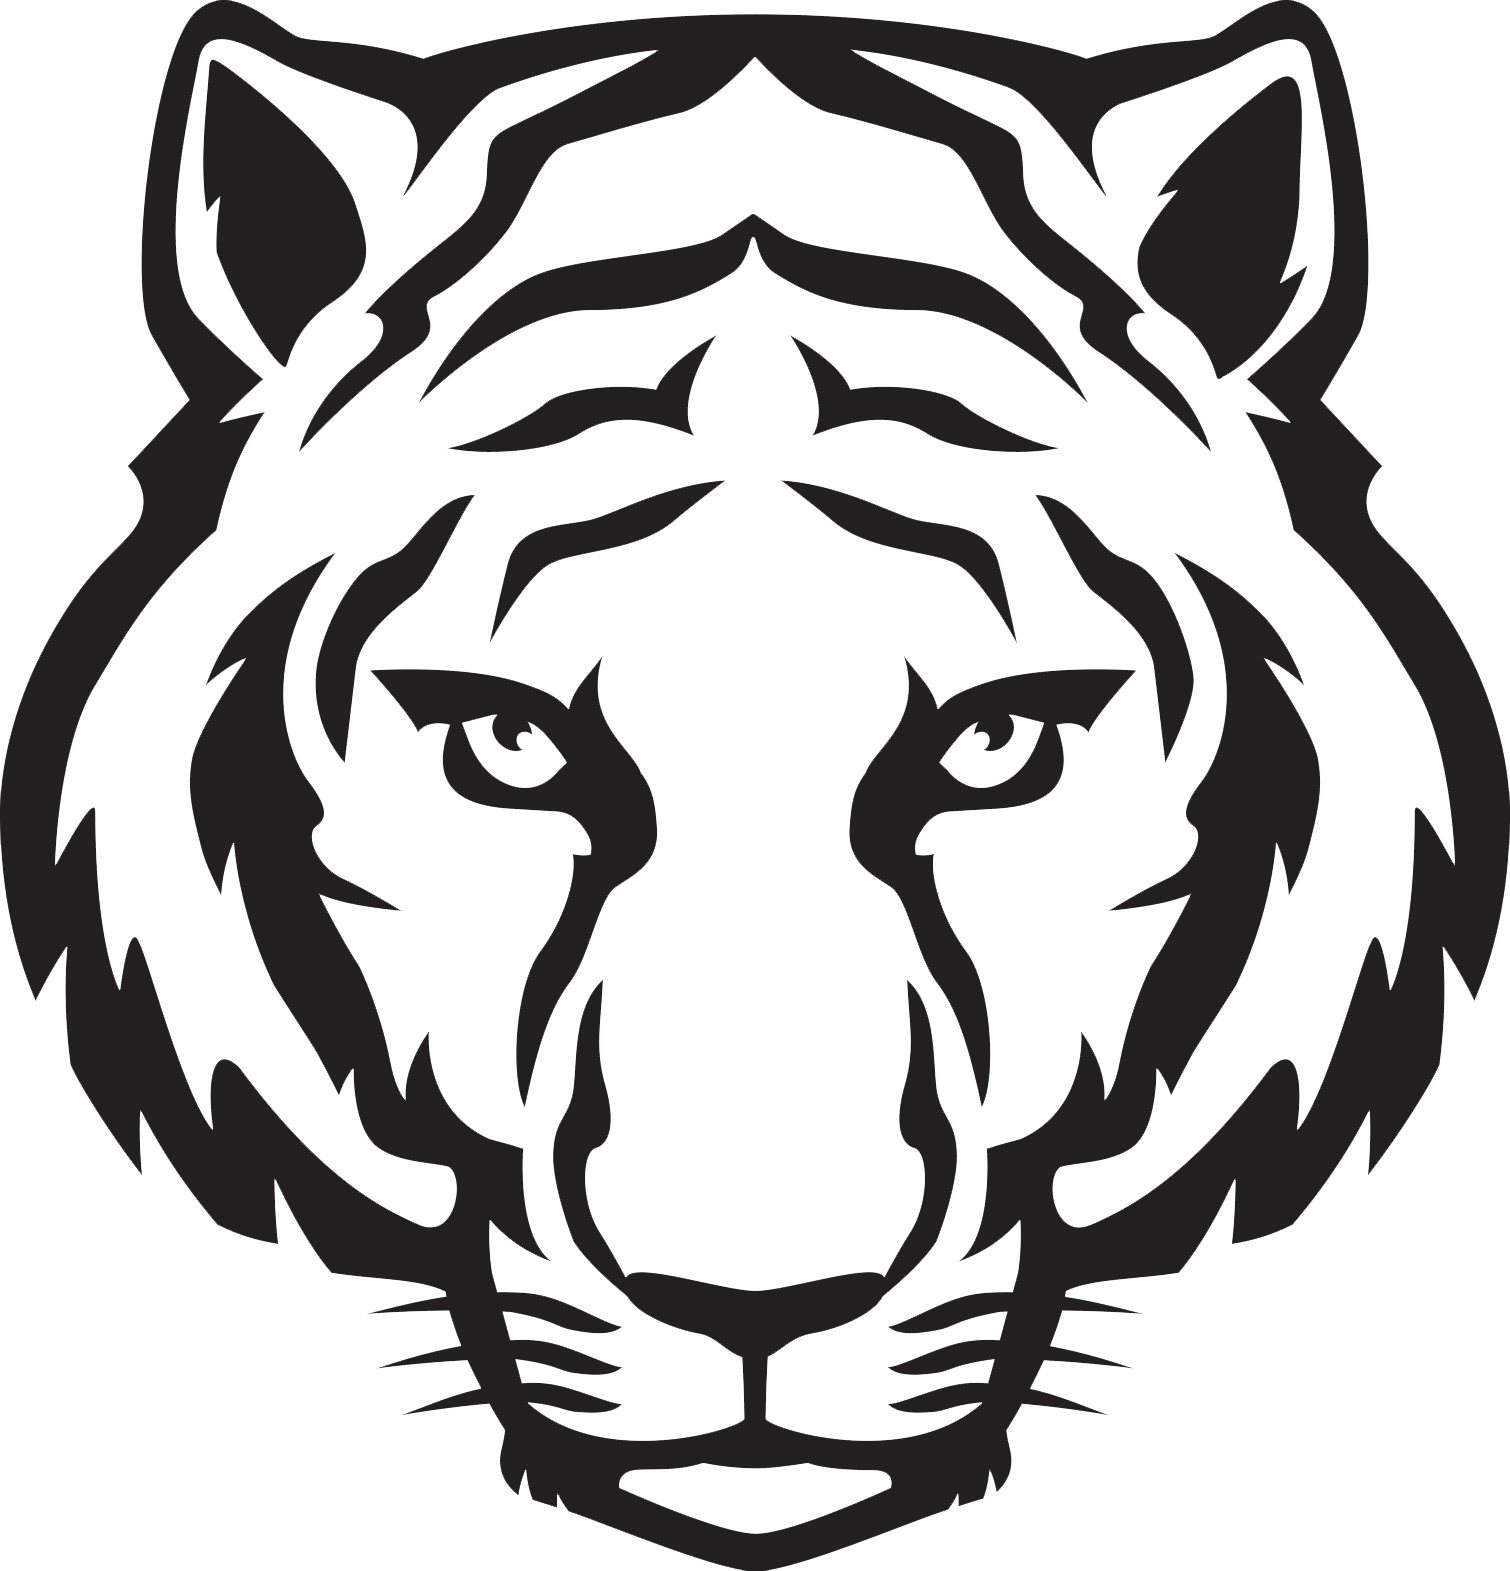 Stylized Tiger Head Graphic PNG image